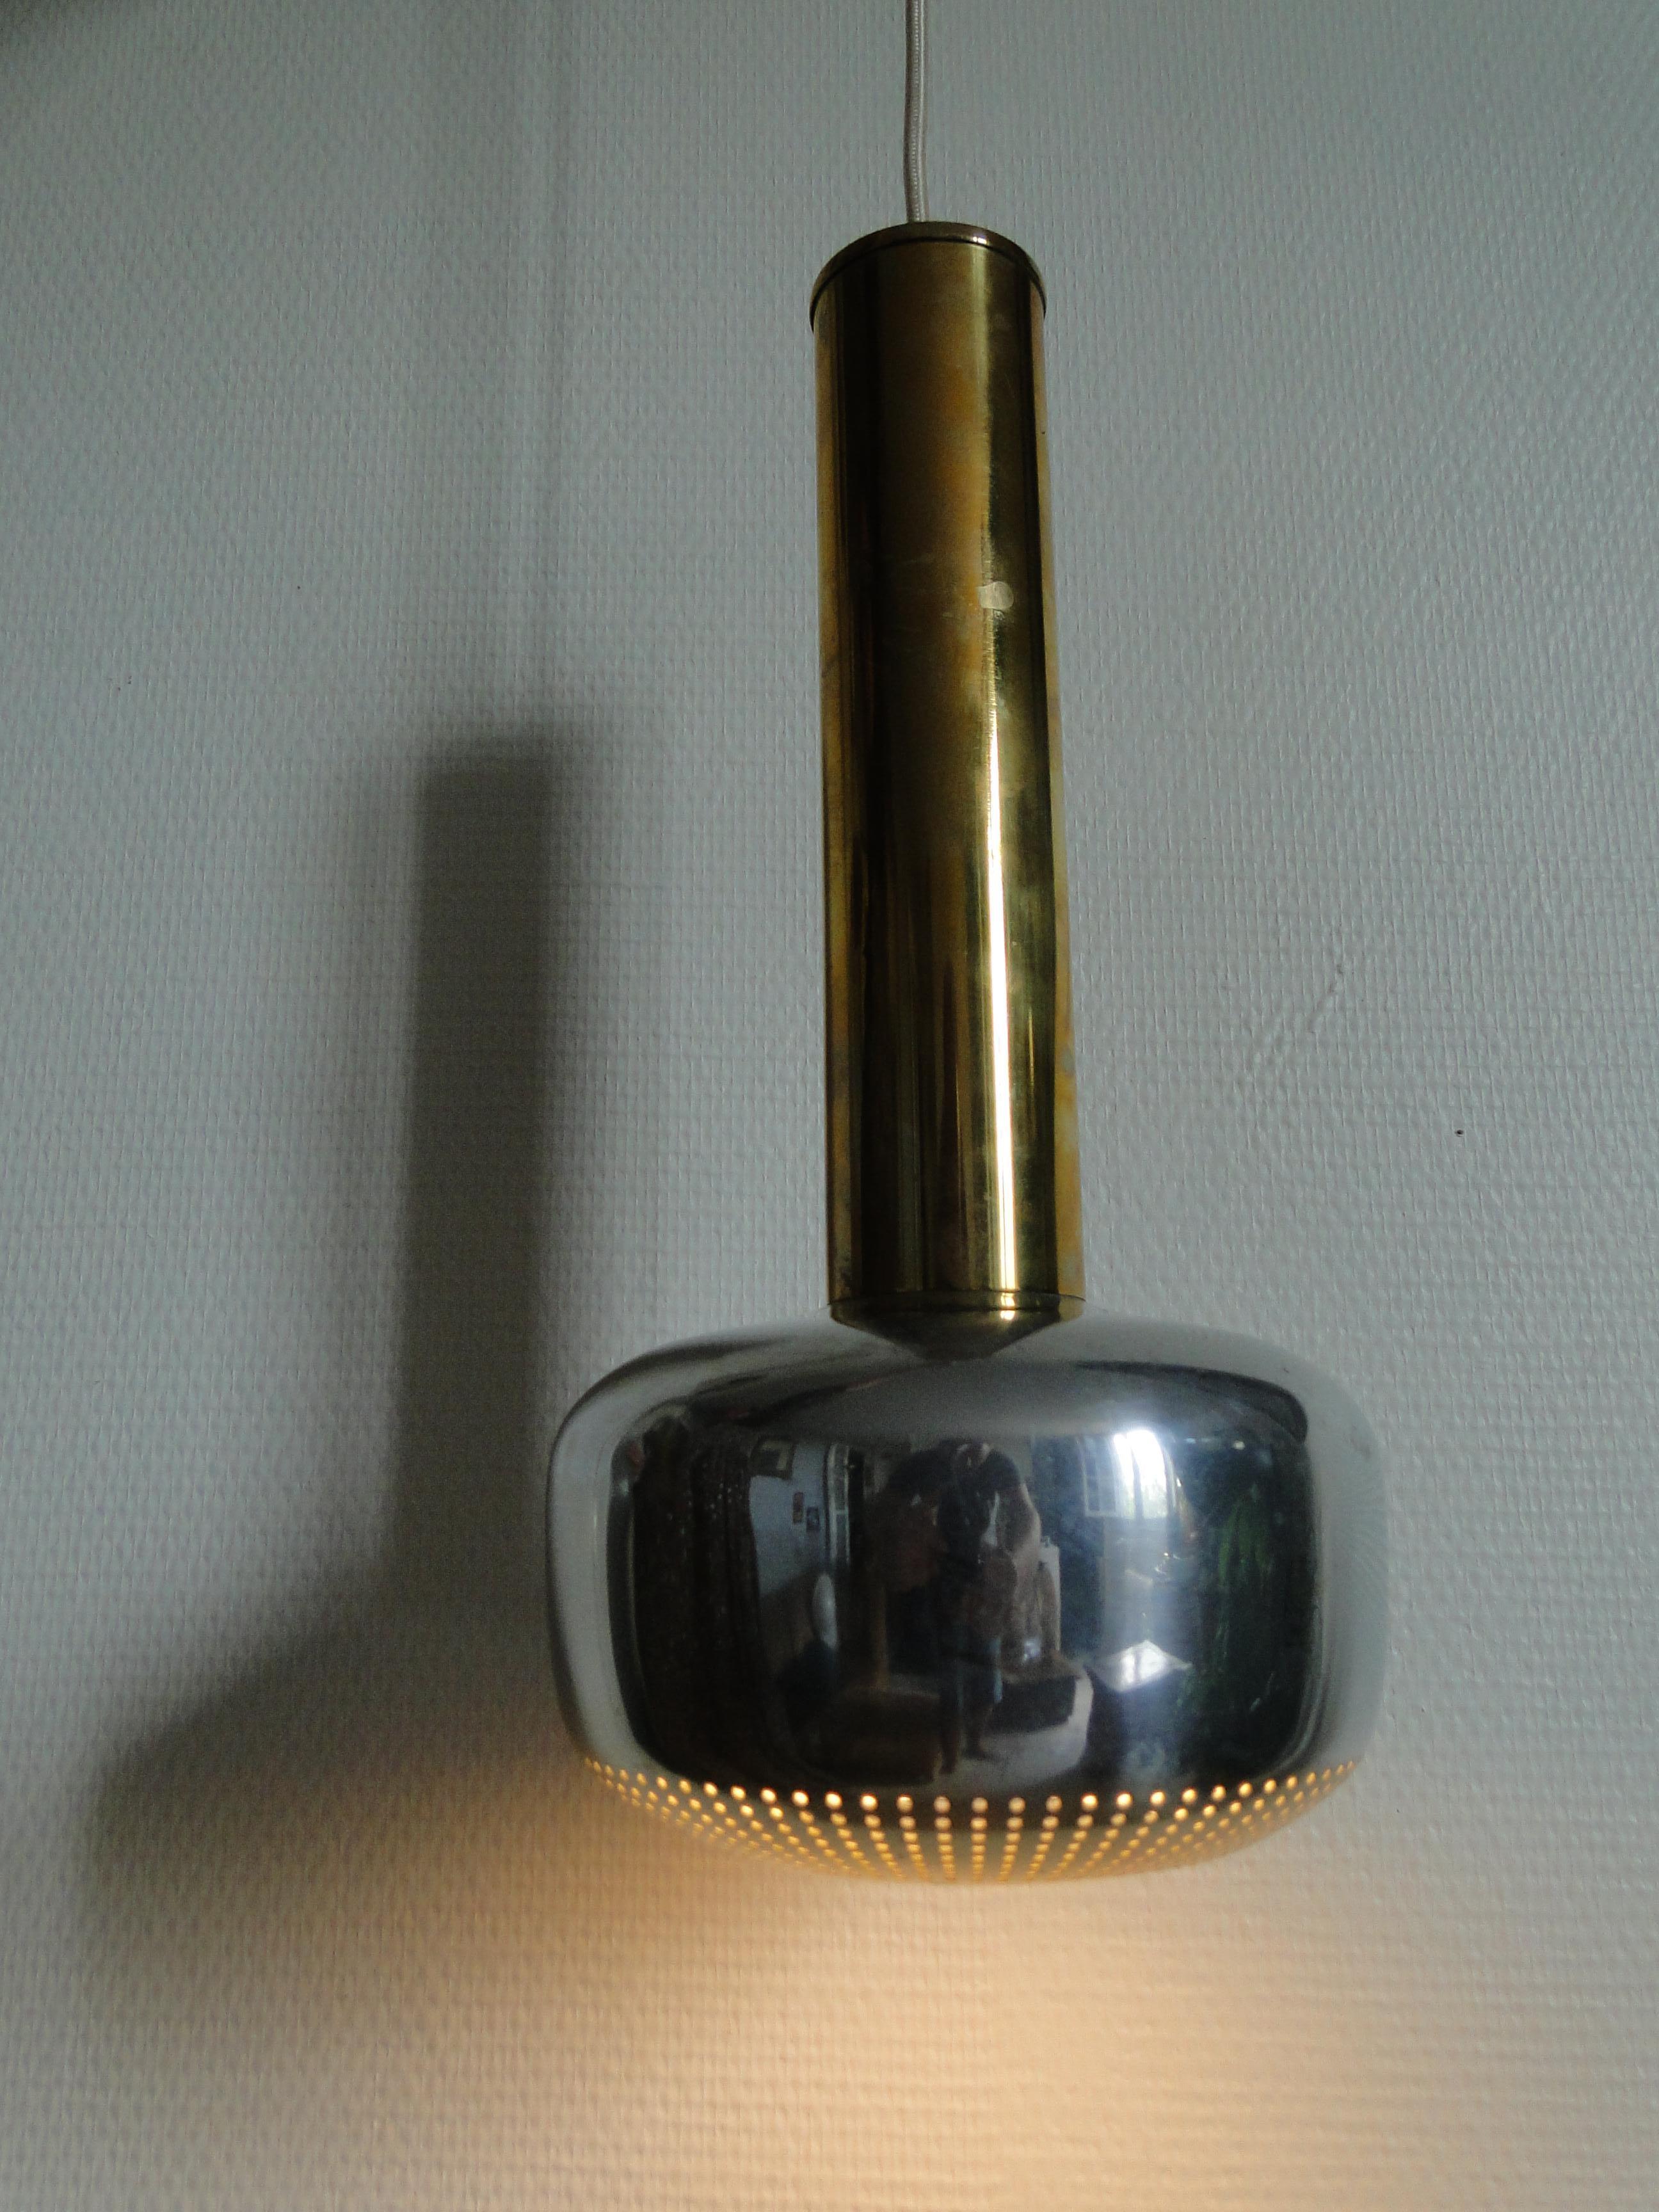 Brass Guldpendel suspension designed in 1956 by Vilhelm Lauritzen for Louis Poulsen.

The perforated metal reflector at the bottom of the lamp is in white brass, the long part is in gold brass. The first part of the electrical wiring is cleverly